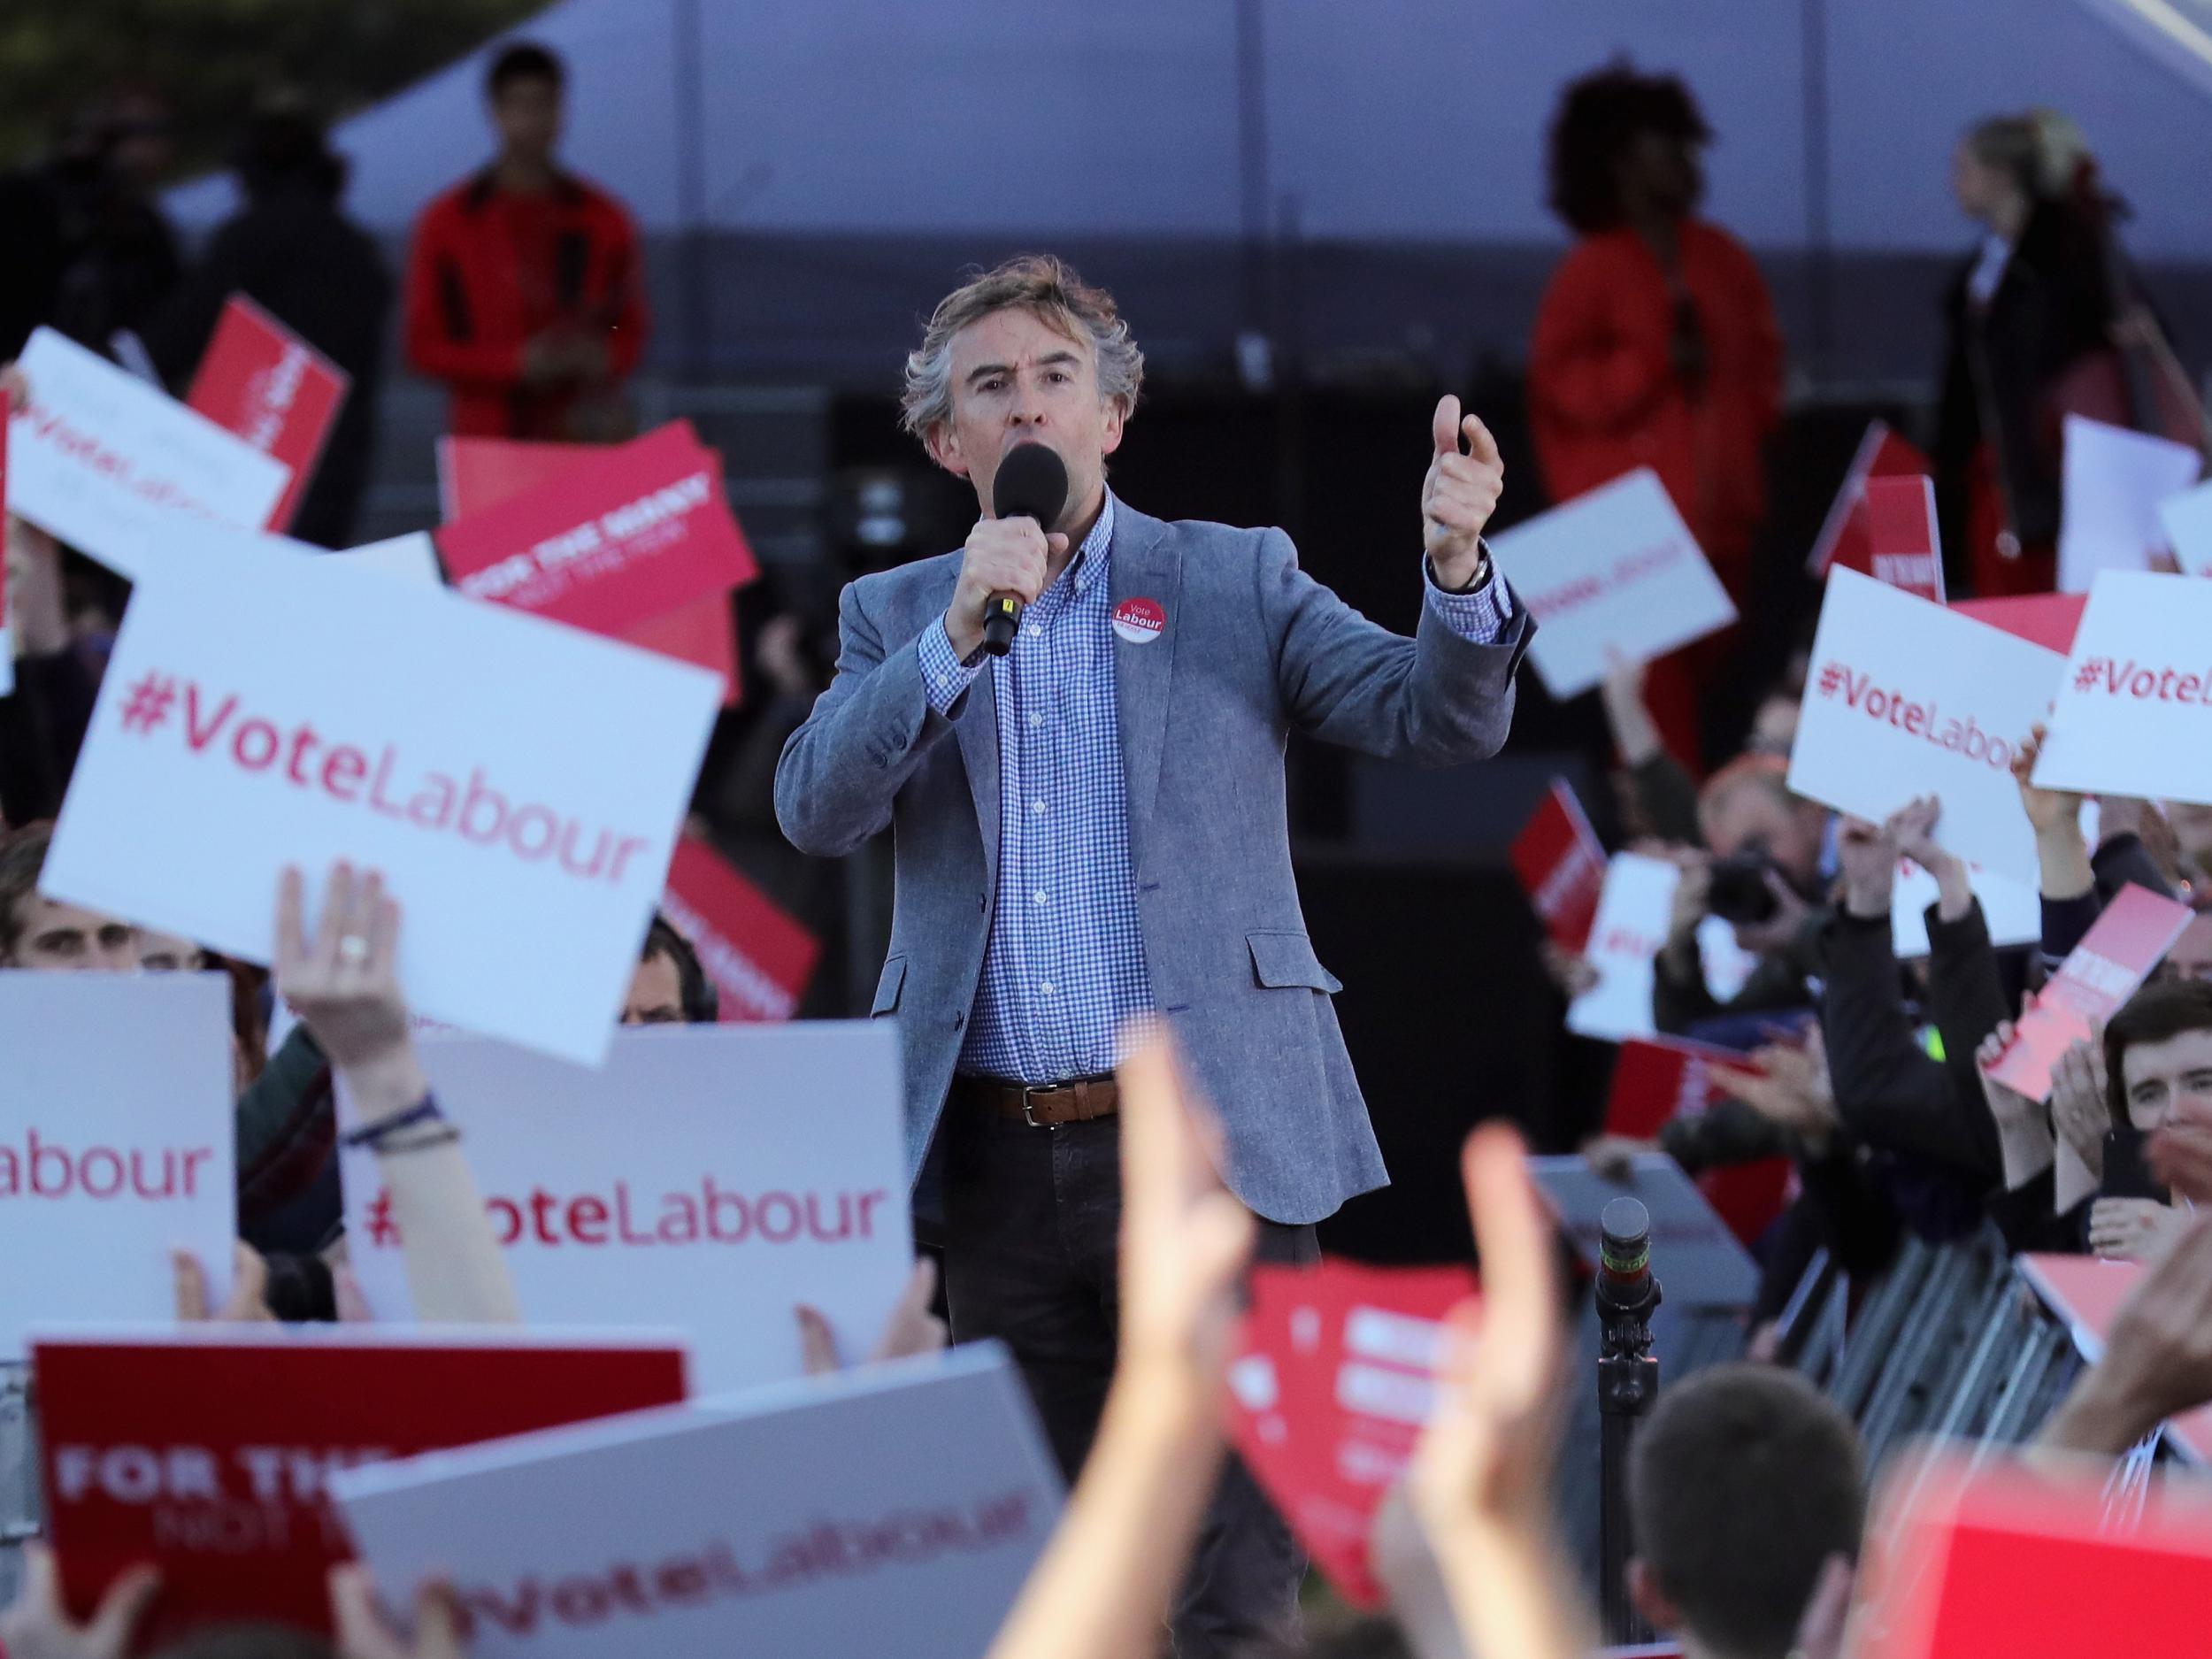 Steve Coogan at a rally supporting Jeremy Corbyn. He is a long-standing Labour supporter